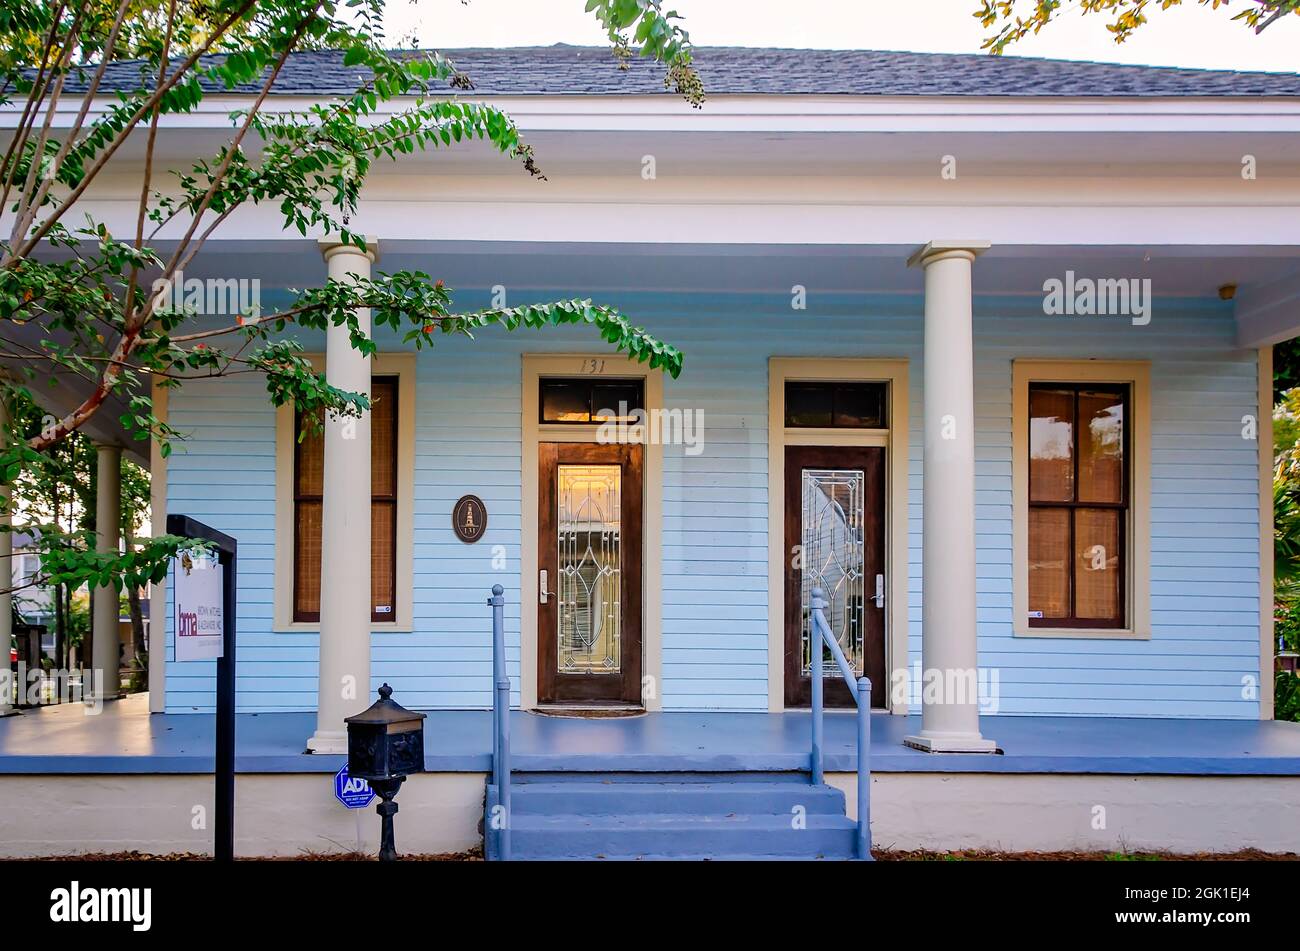 A 1910 Biloxi Cottage is pictured on Rue Magnolia, Sept. 5, 2021, in Biloxi, Mississippi. The house is part of the Downtown Biloxi Historic District. Stock Photo